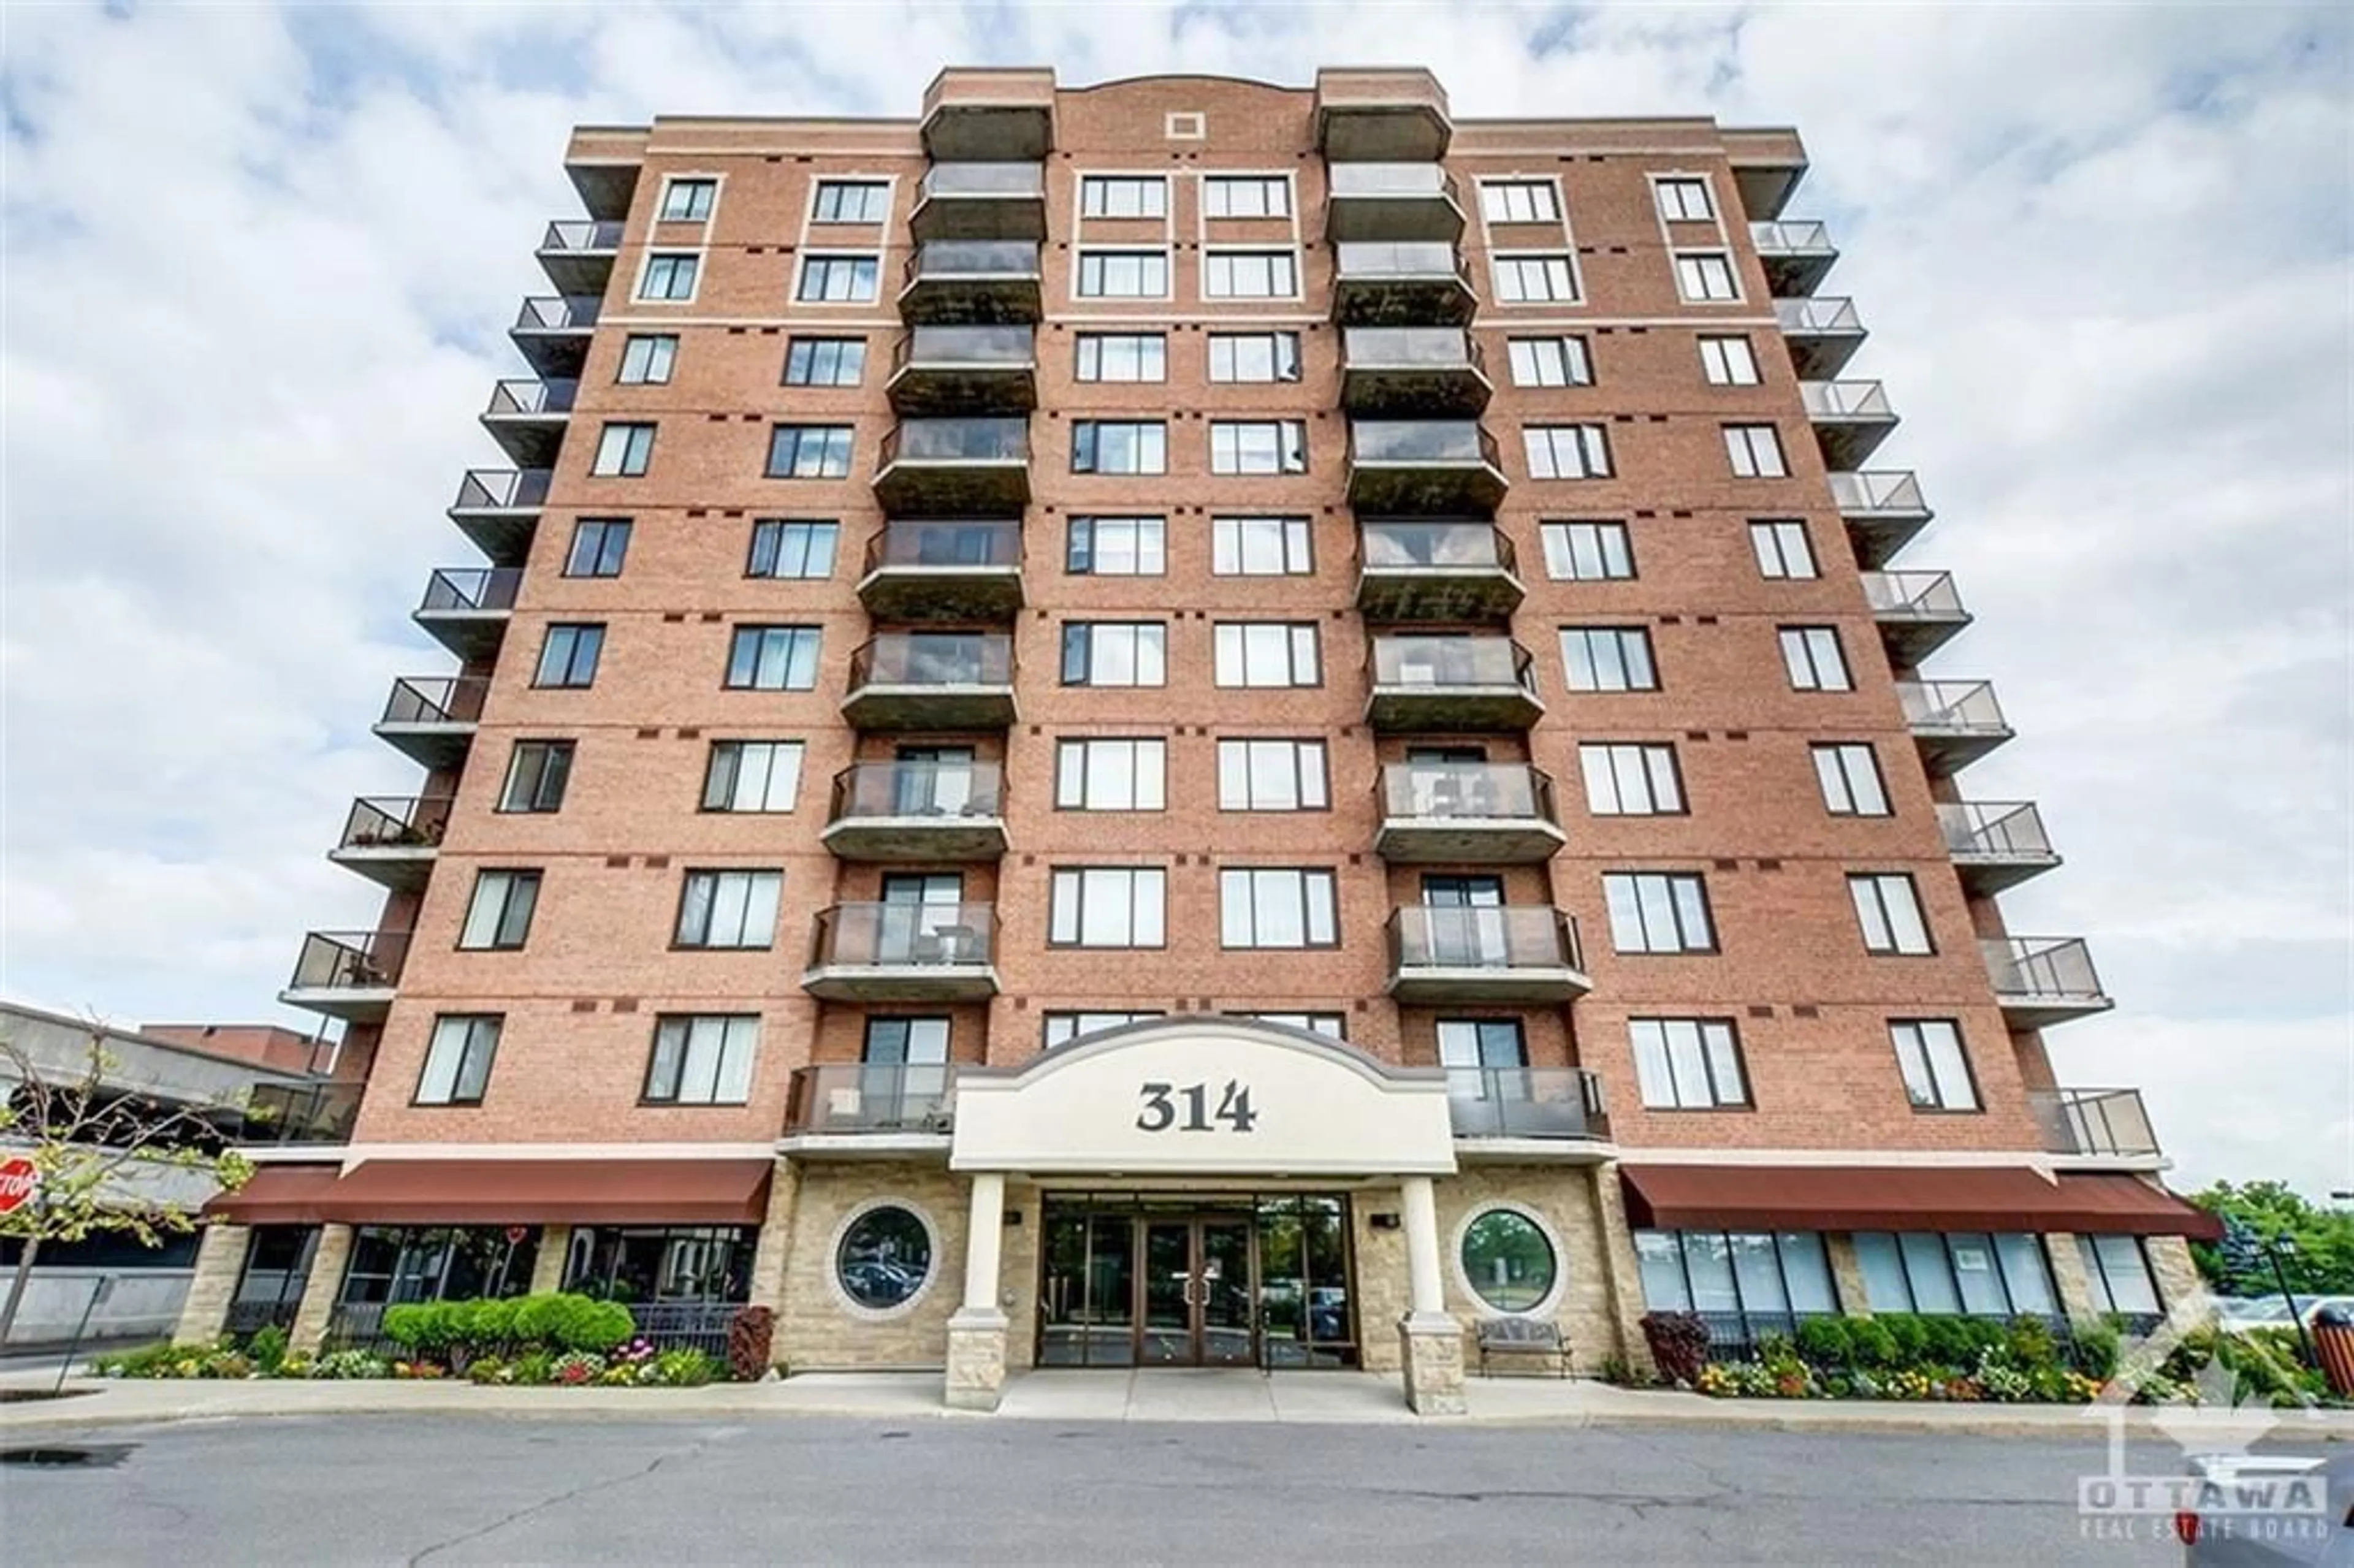 A pic from exterior of the house or condo for 314 CENTRAL PARK Dr #101, Ottawa Ontario K2C 4G4